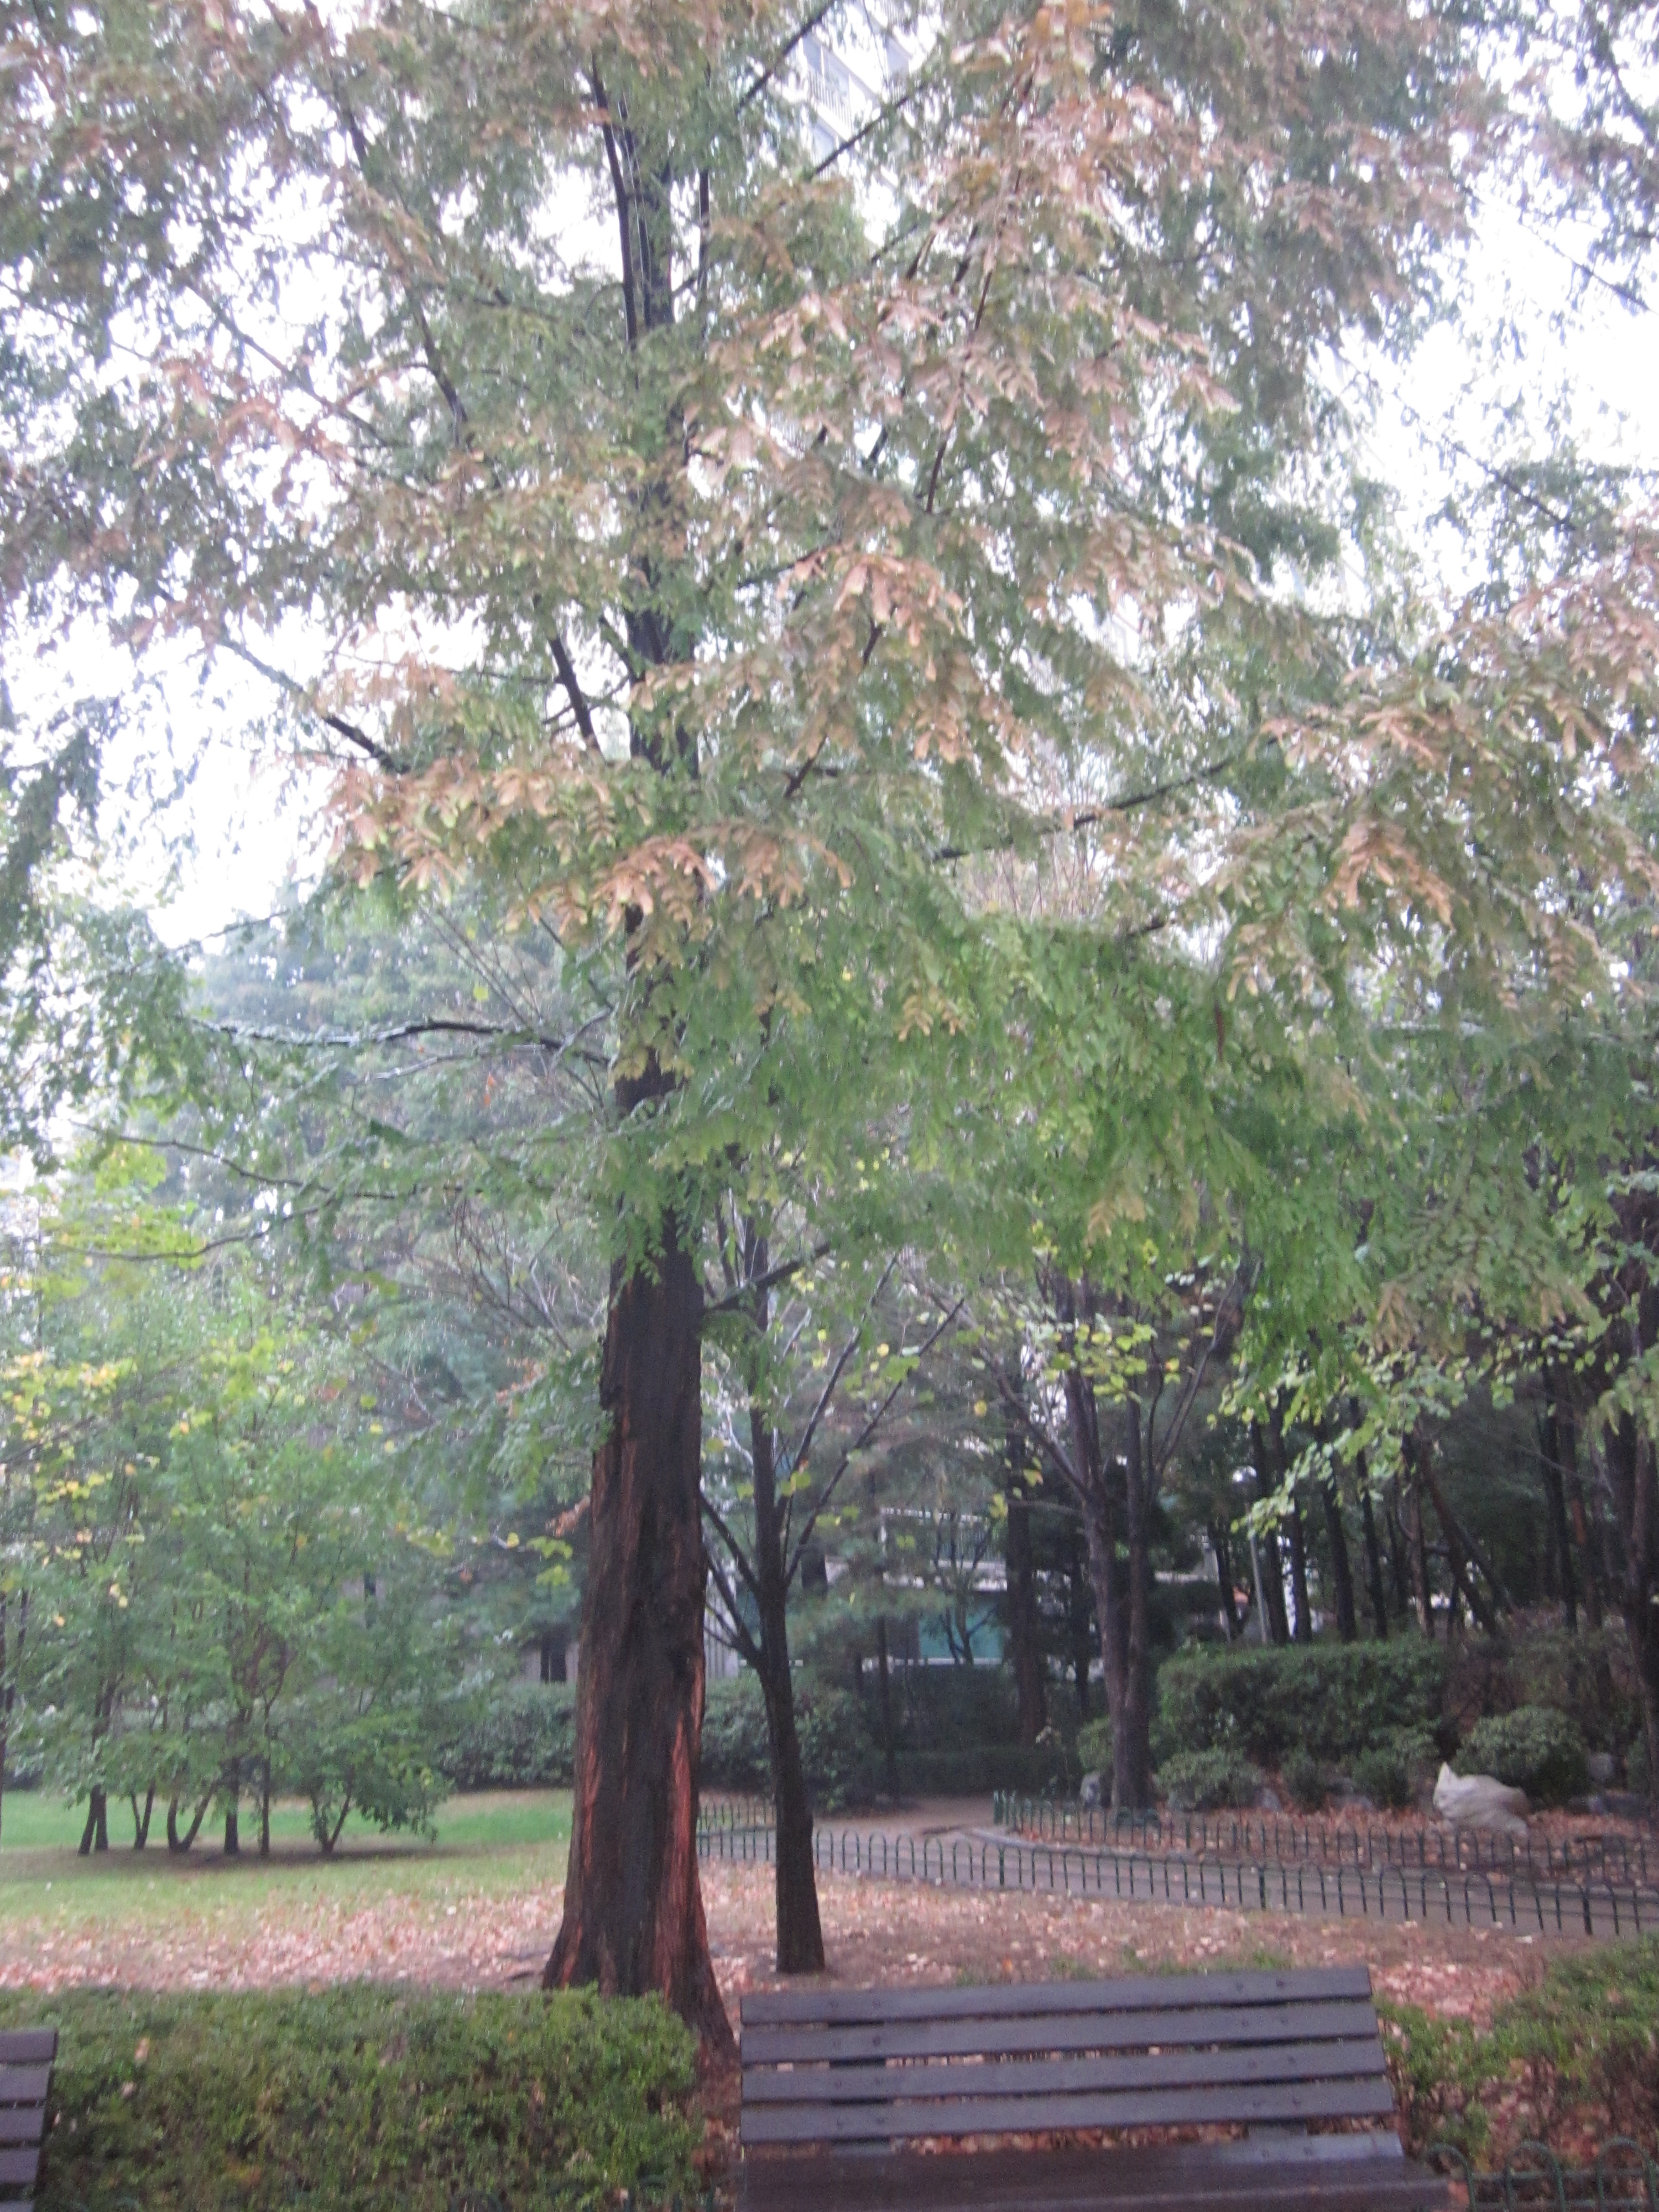 A dawn redwood tree (metasequoia) in a park in suburban South Korea, with its striking red bark and some of the deciduous needles already changing to brown